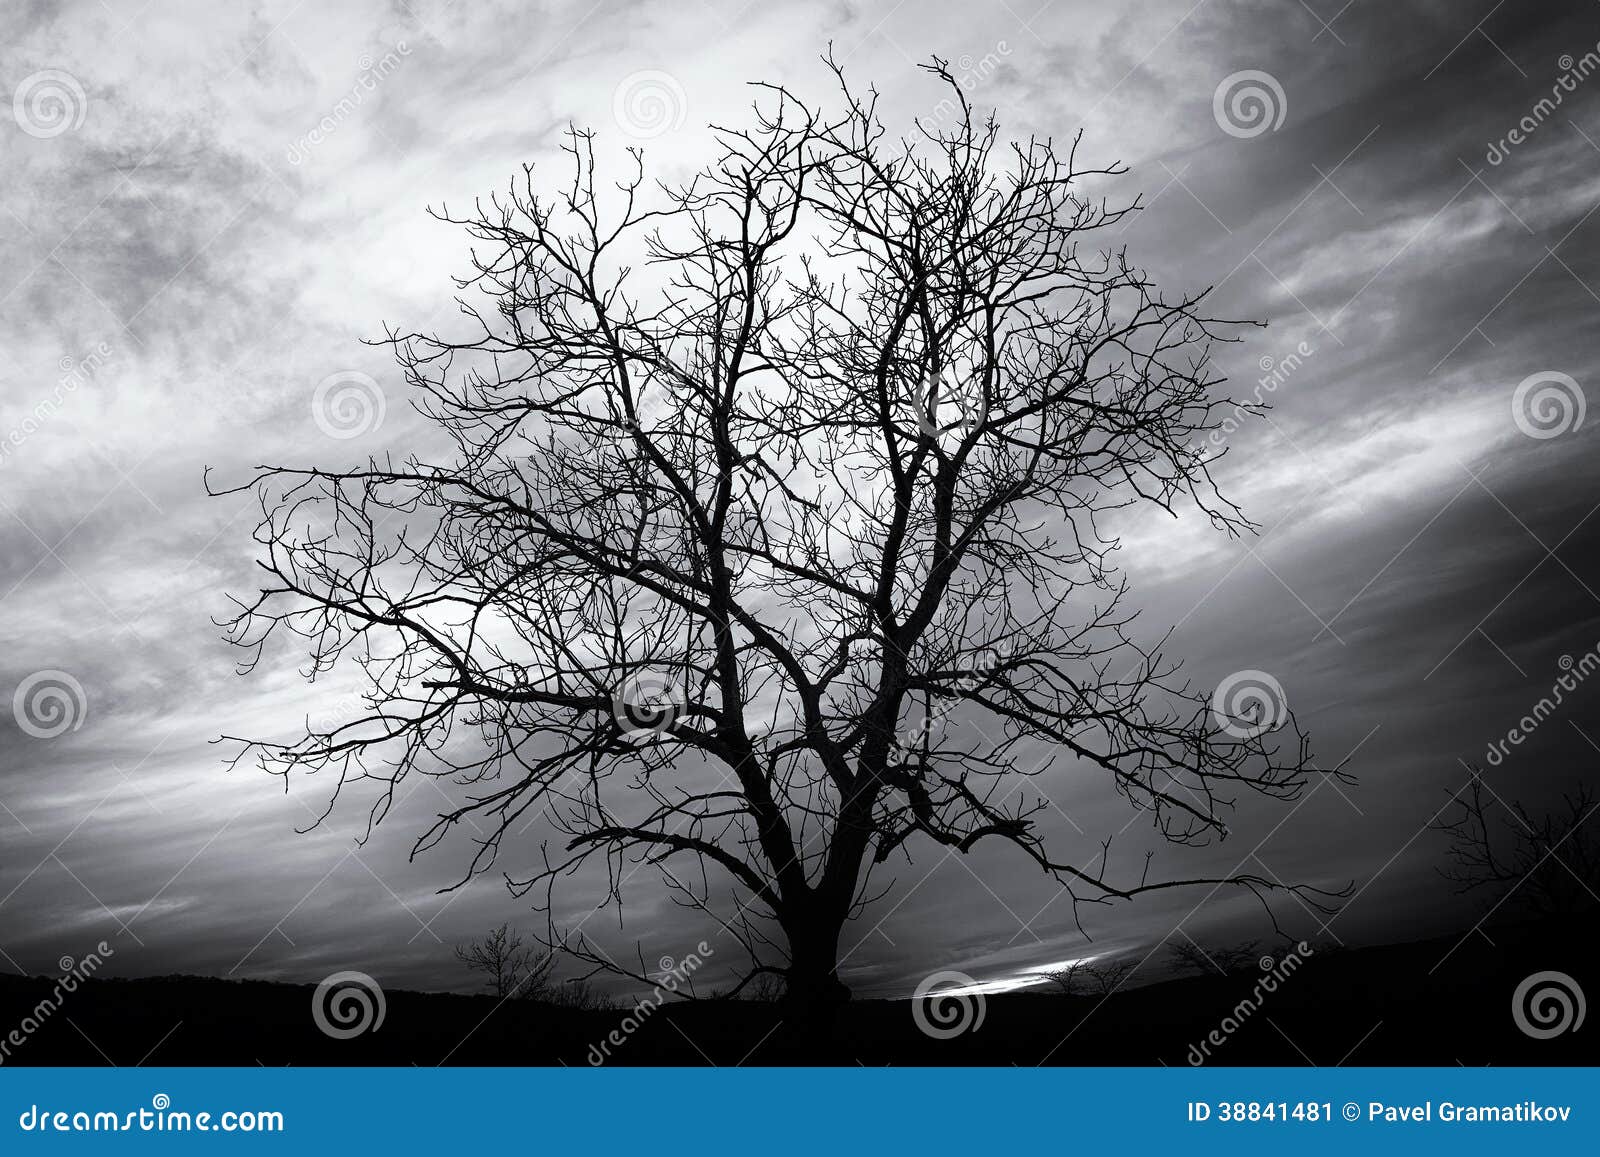 tinted black and white image of bare tree